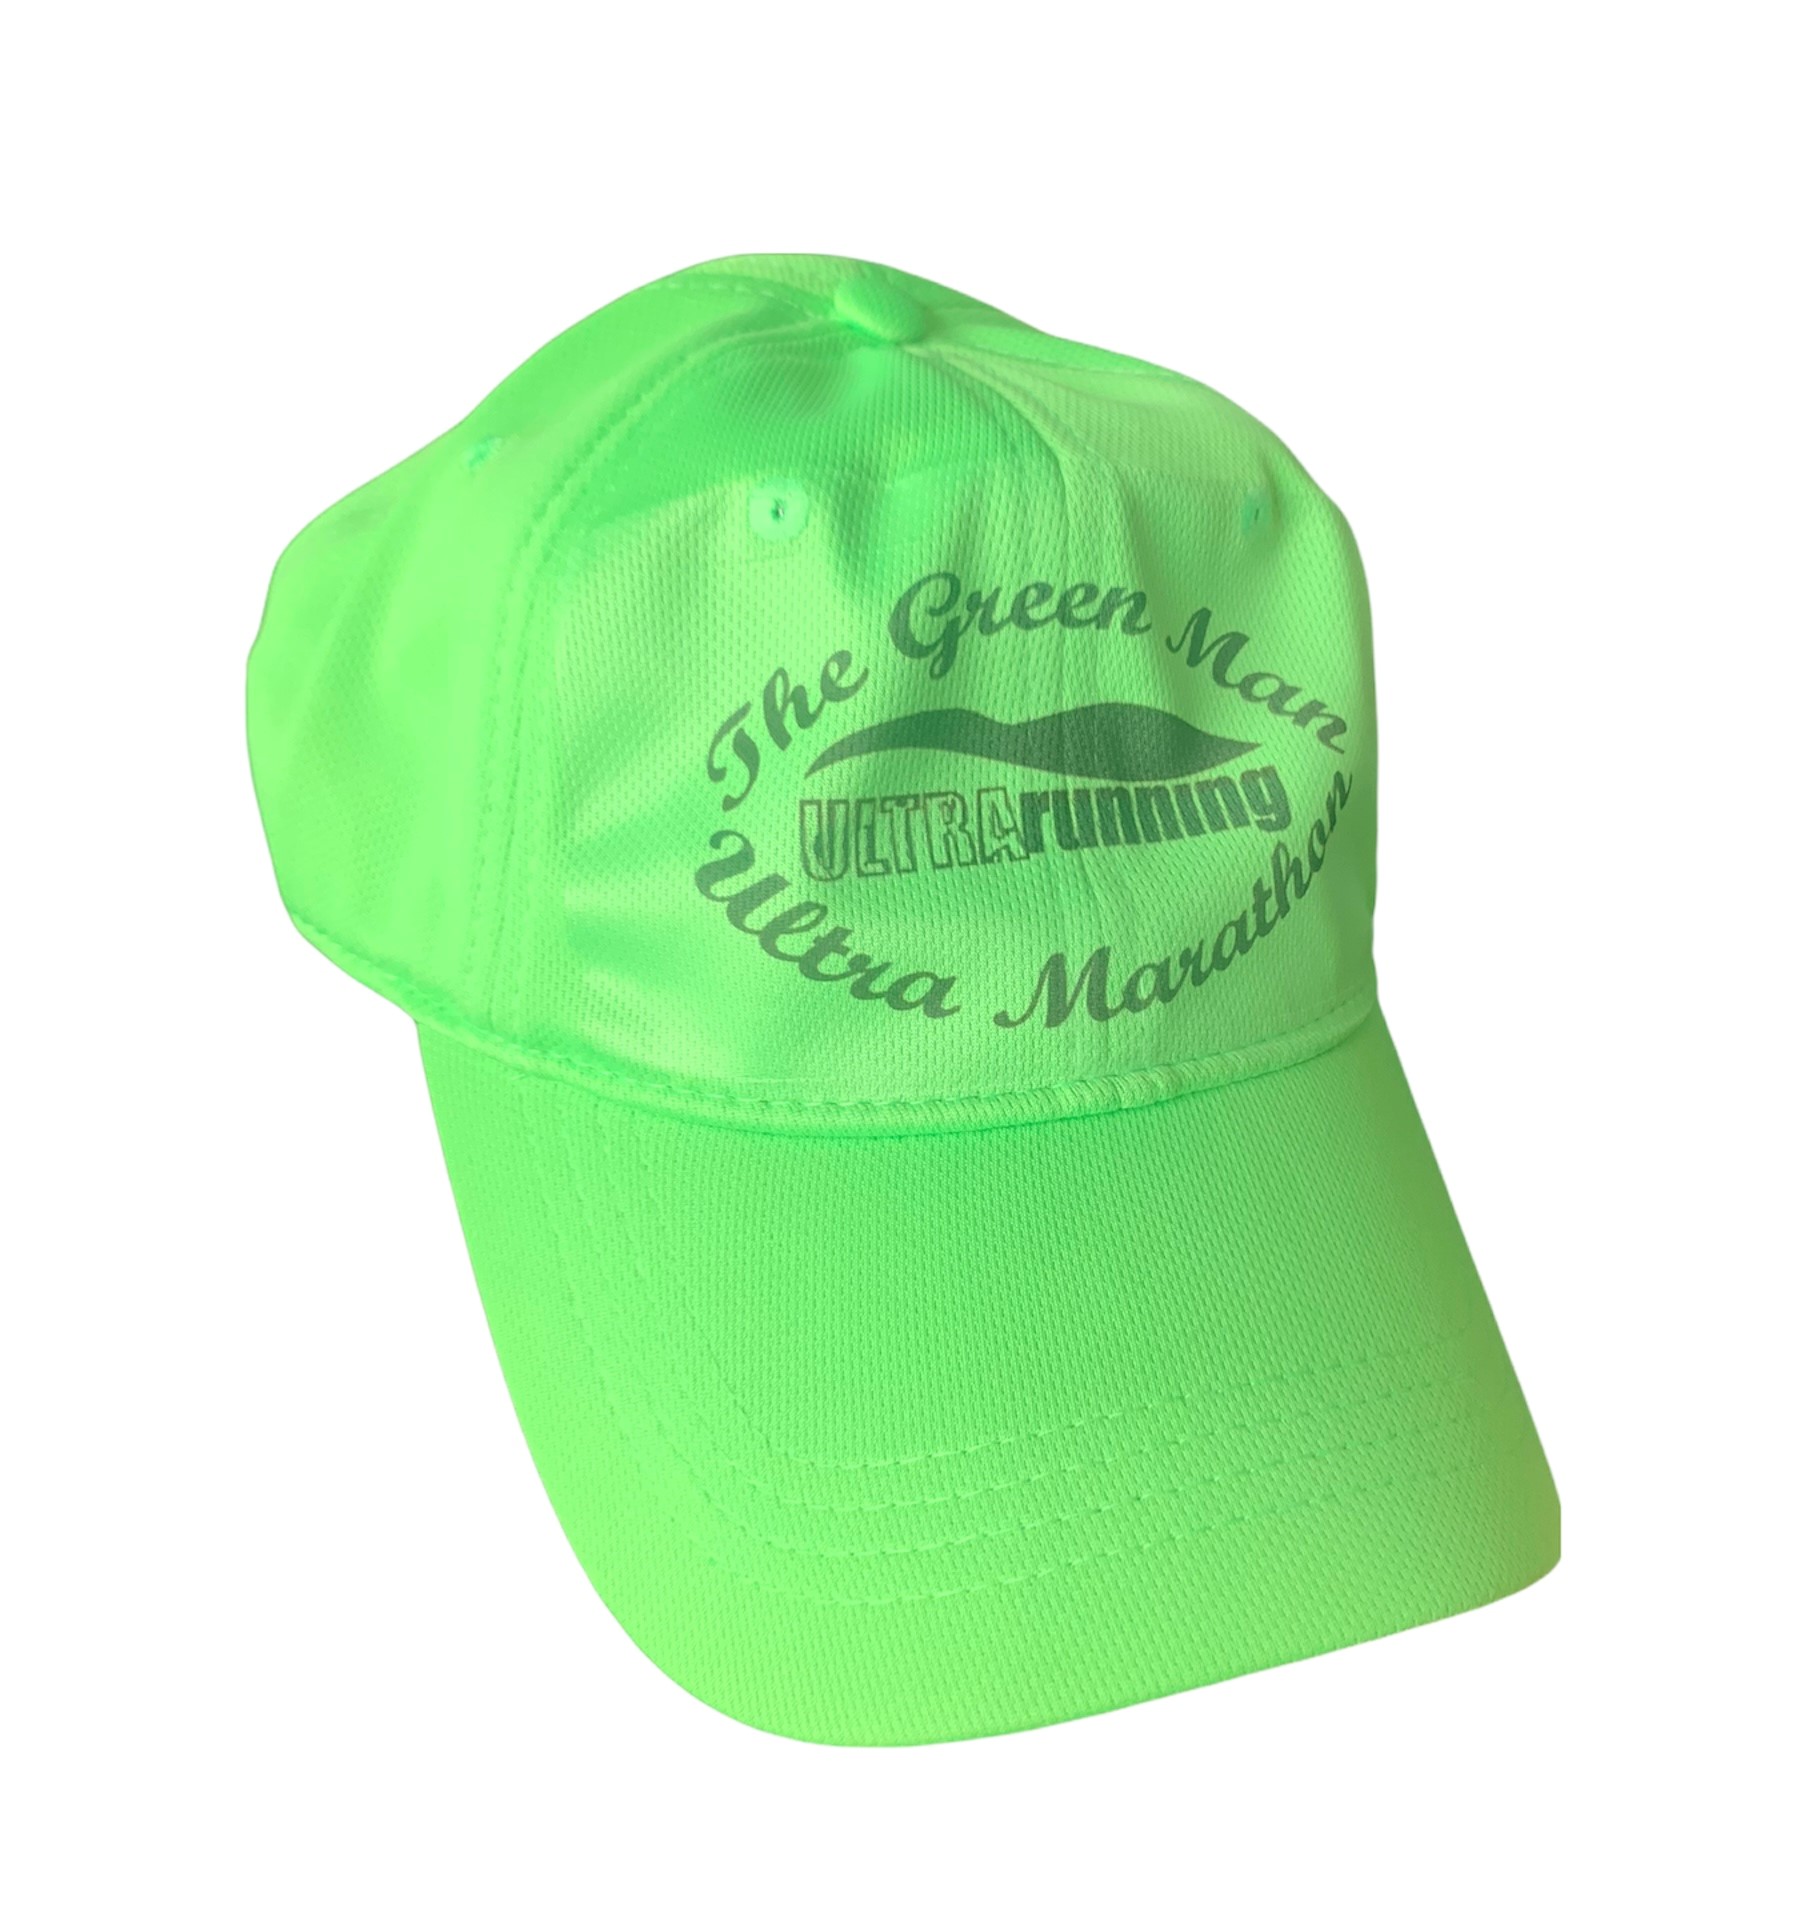 Polyester Cool Cap with URL logo - The Green Man Ultra